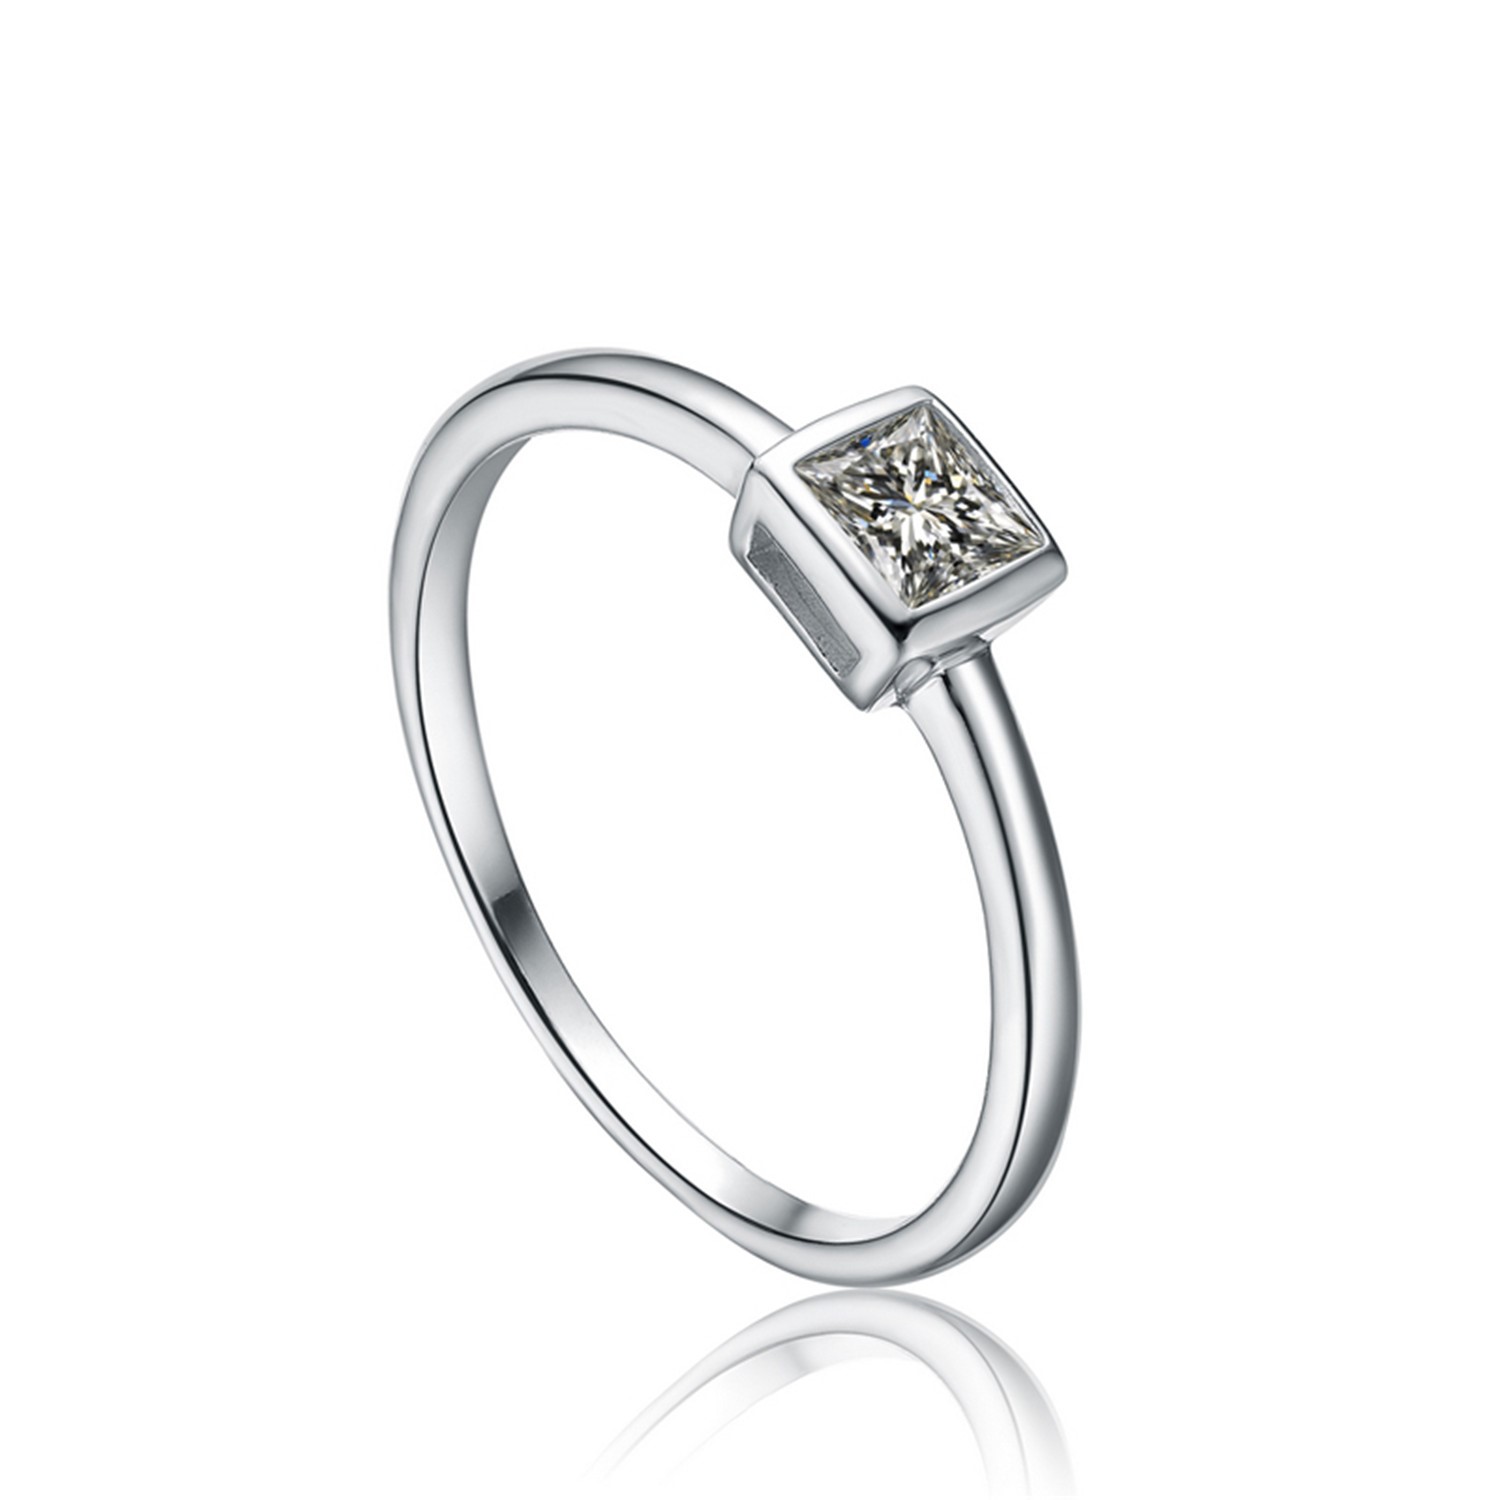 Light Simple Small Square Jewelry Female Cute Finger Rings Women Girls Ring White CZ 925 Silver (图2)